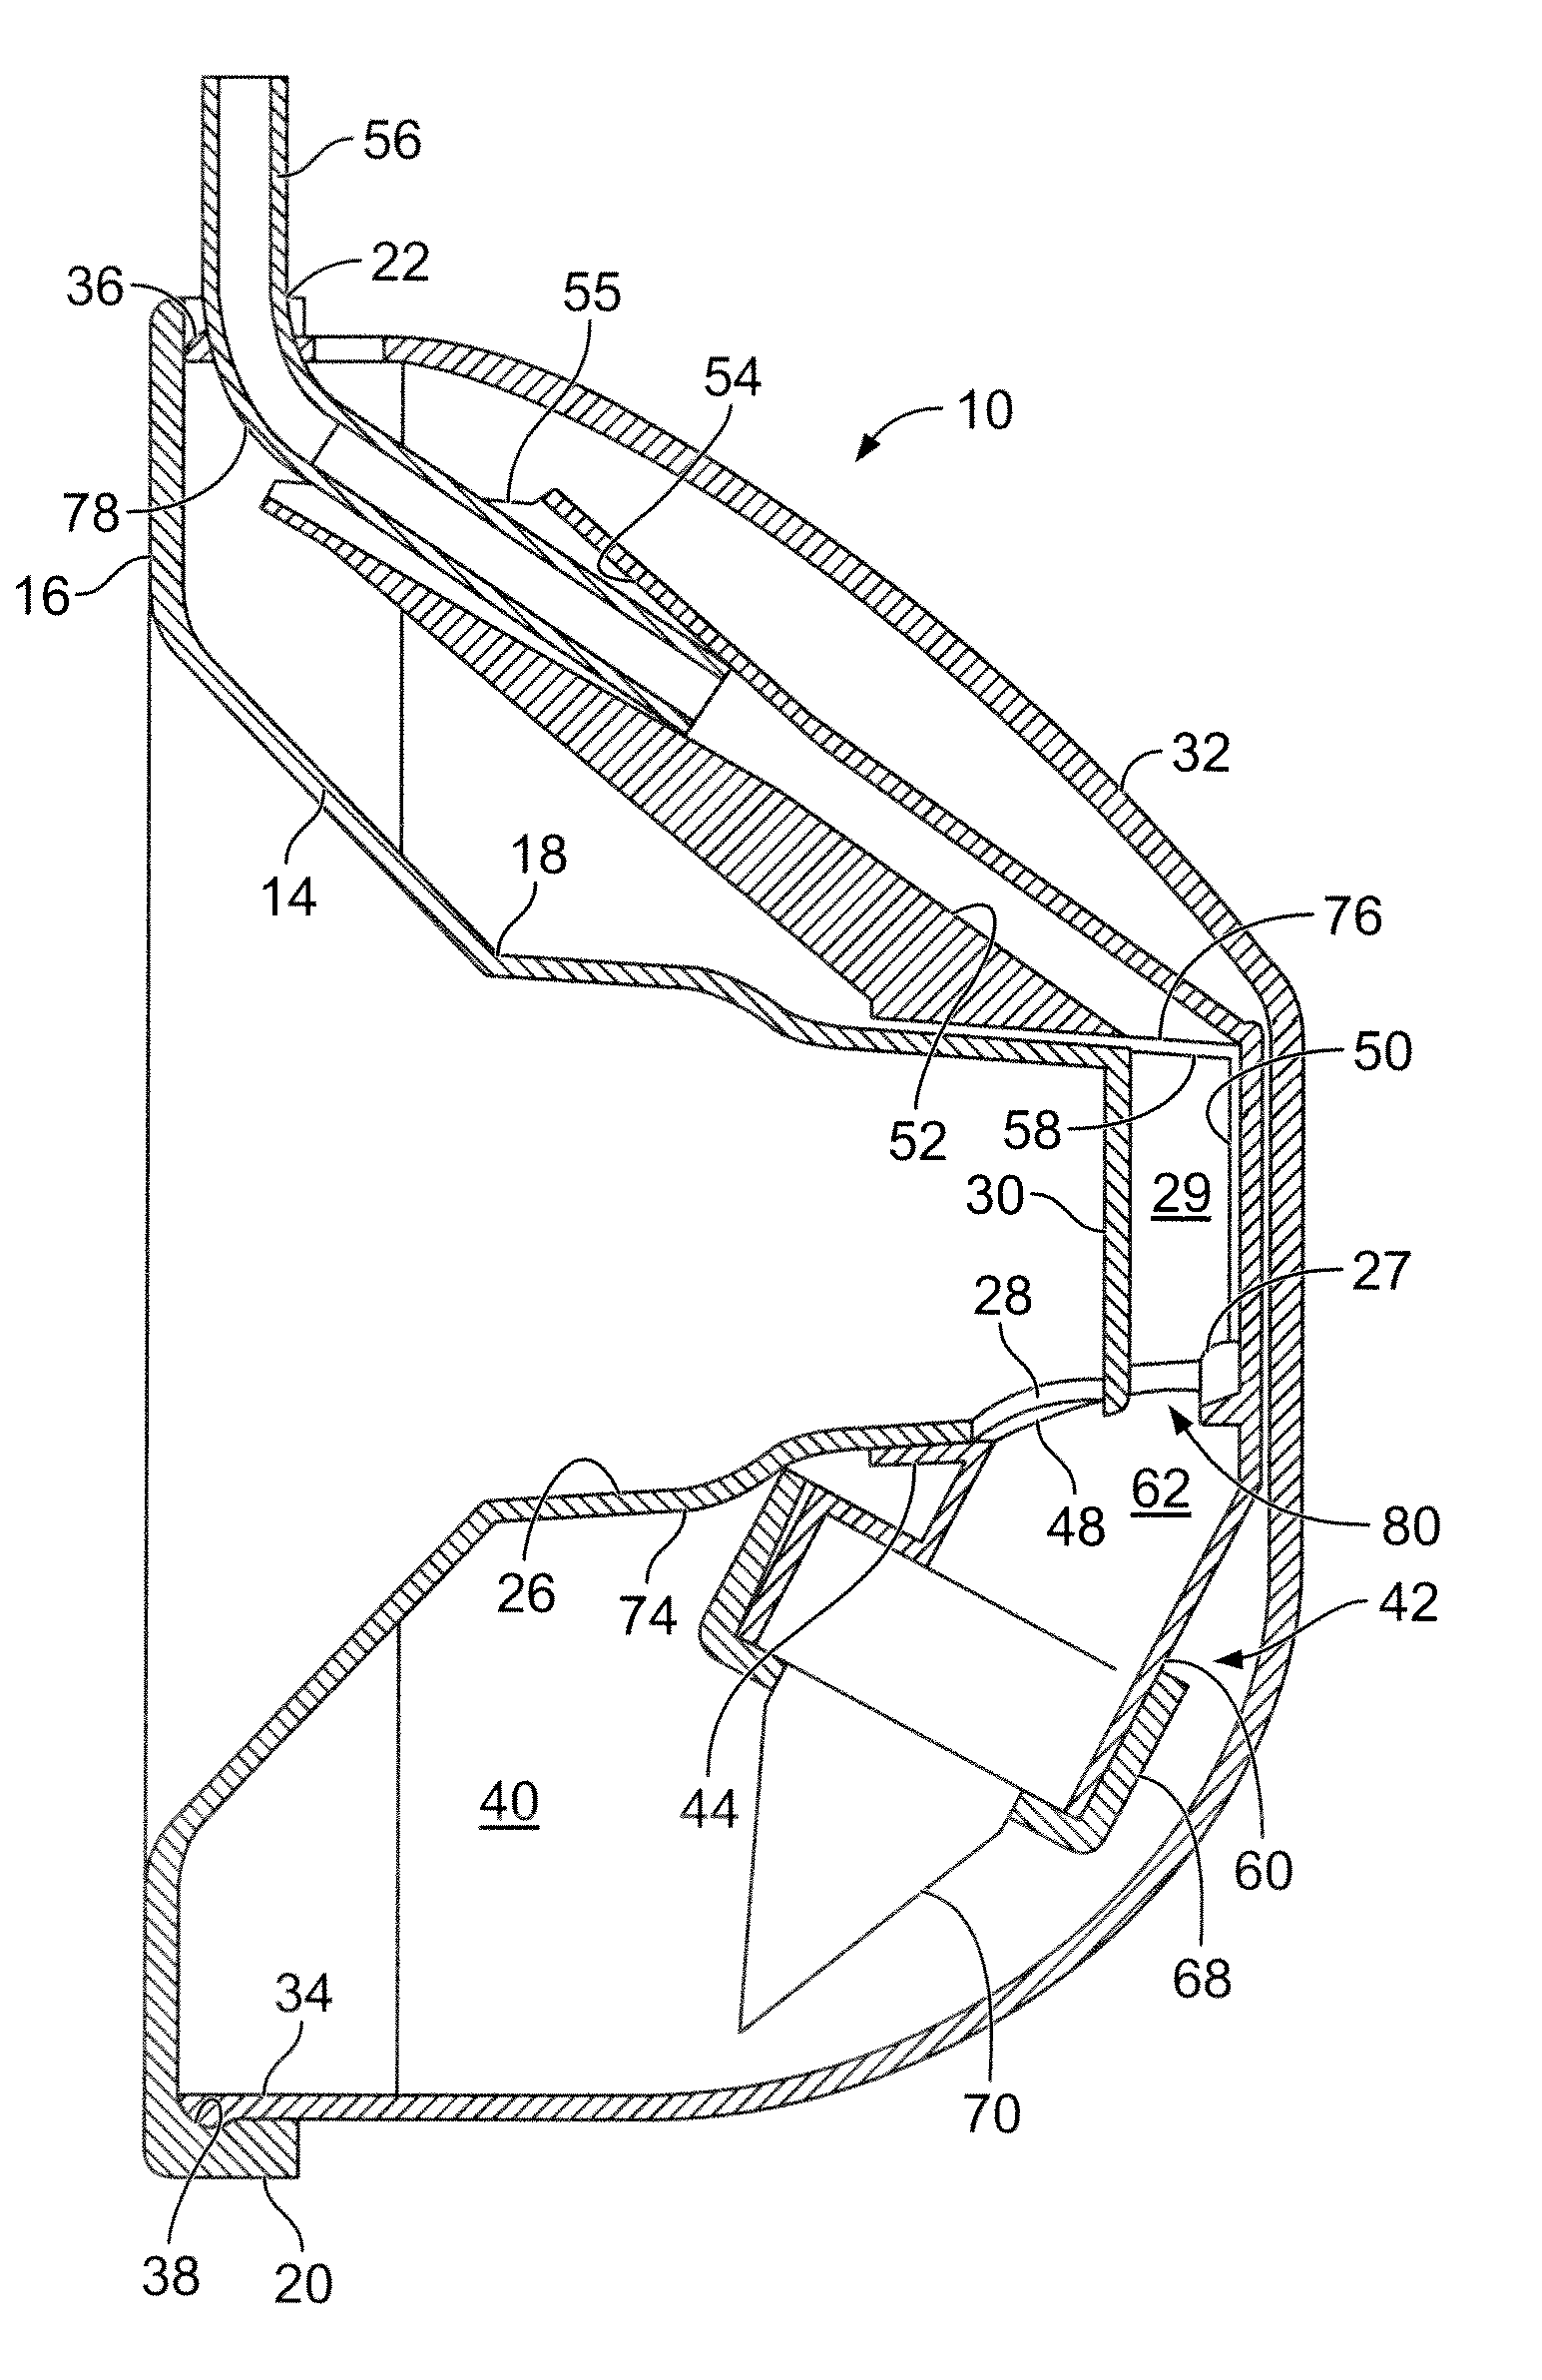 Submersible Valve for a Breast Milk Collection Device with Self Contained Reservoir